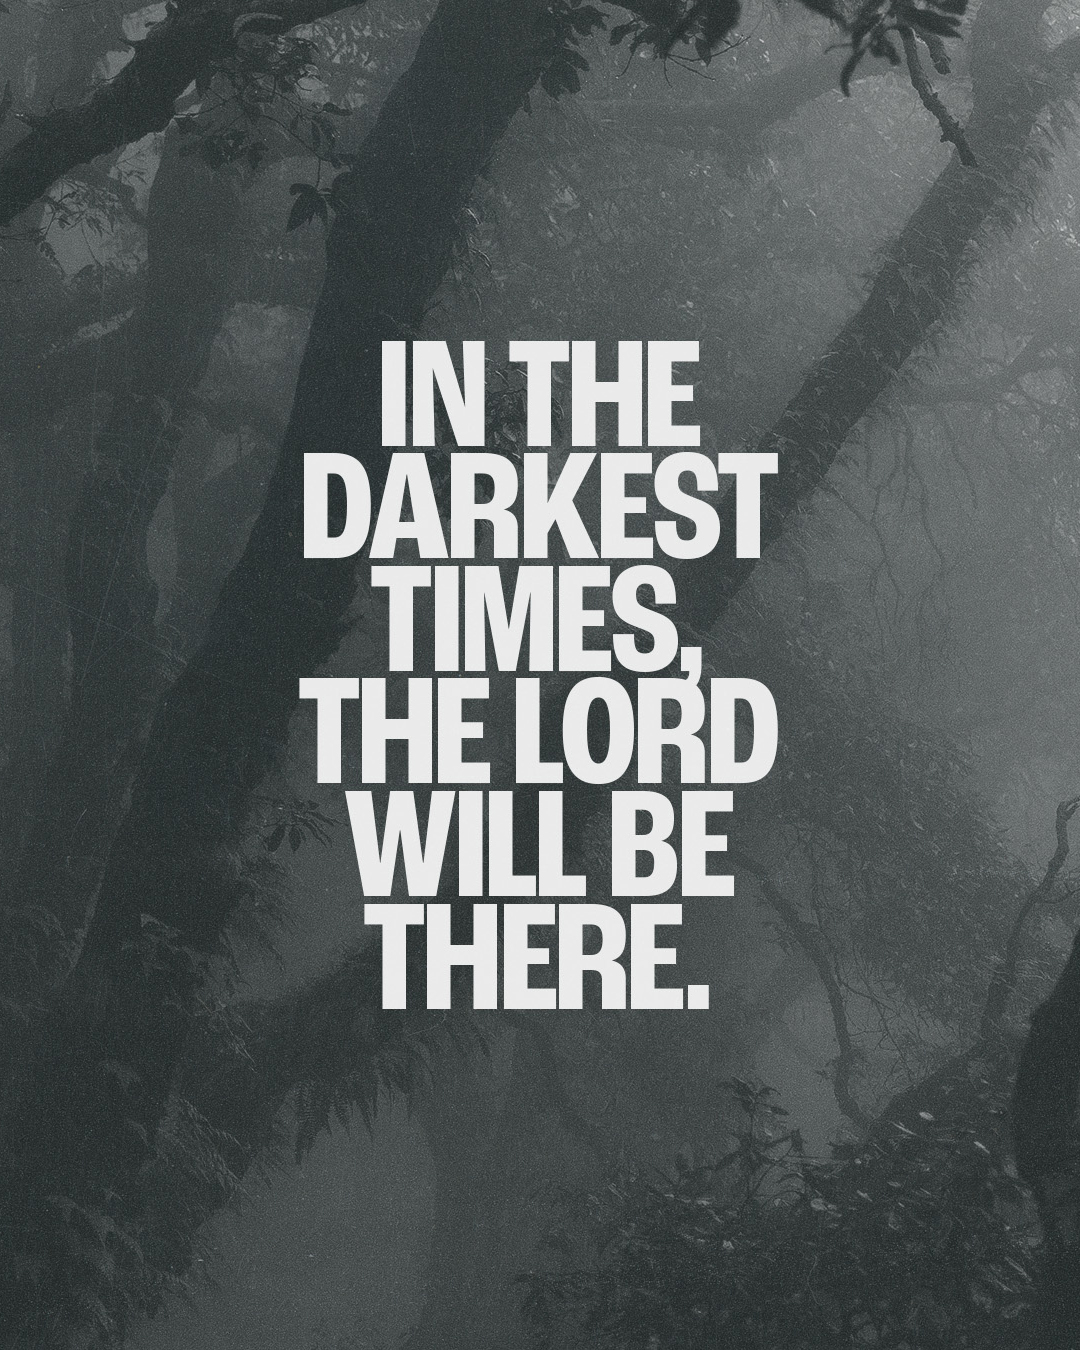 In the darkest times, the Lord will be there.